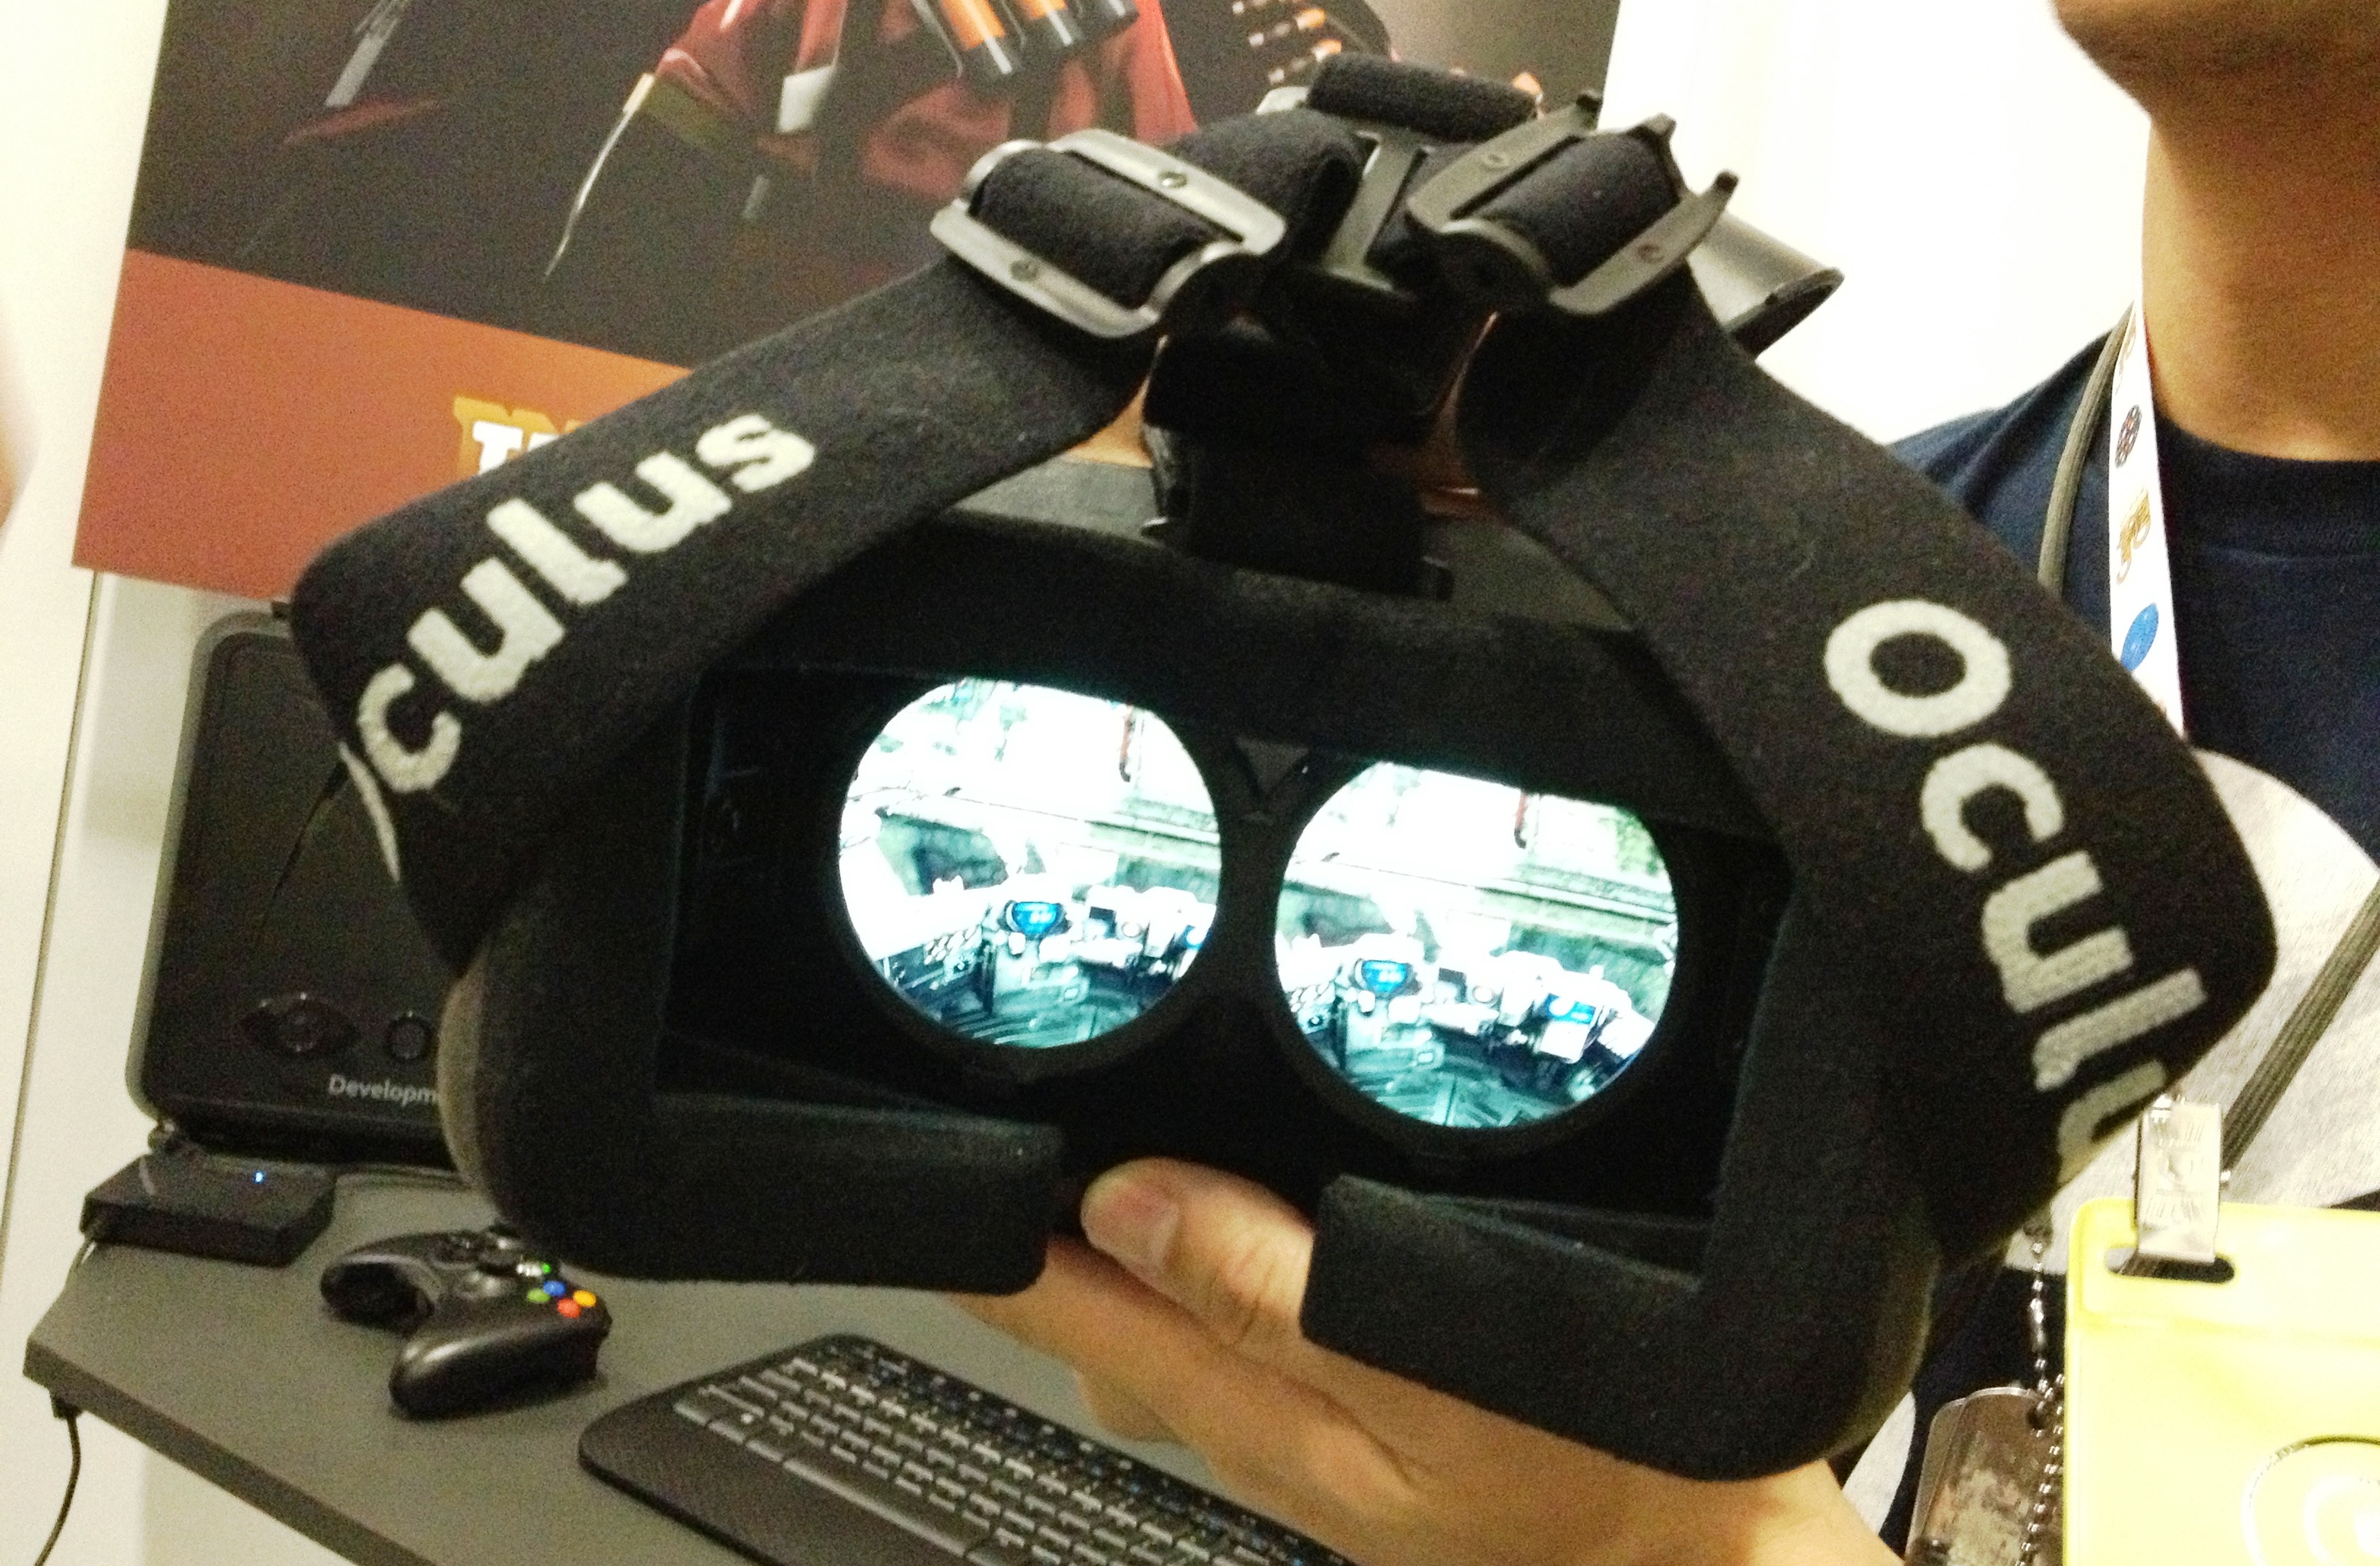 Oculus VR booth at GDC 2013